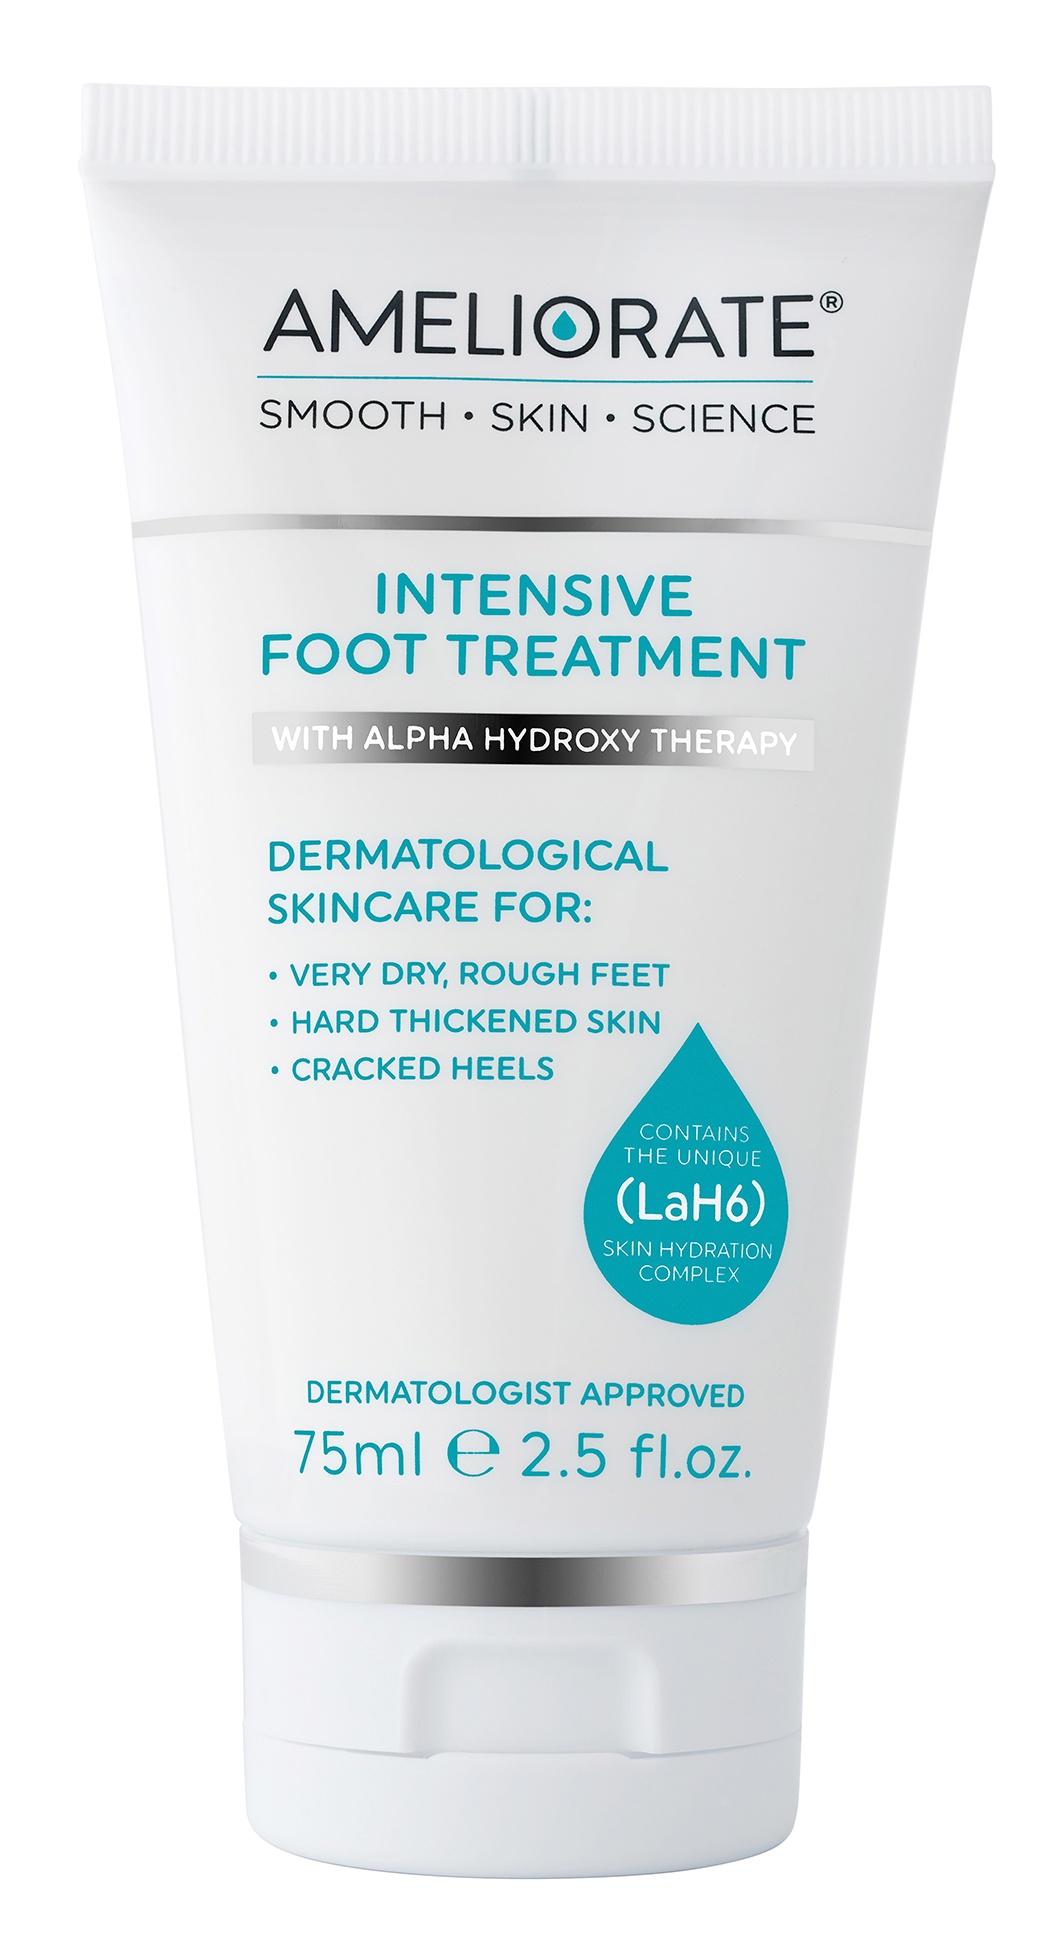 Ameliorate Intensive Foot Treatment